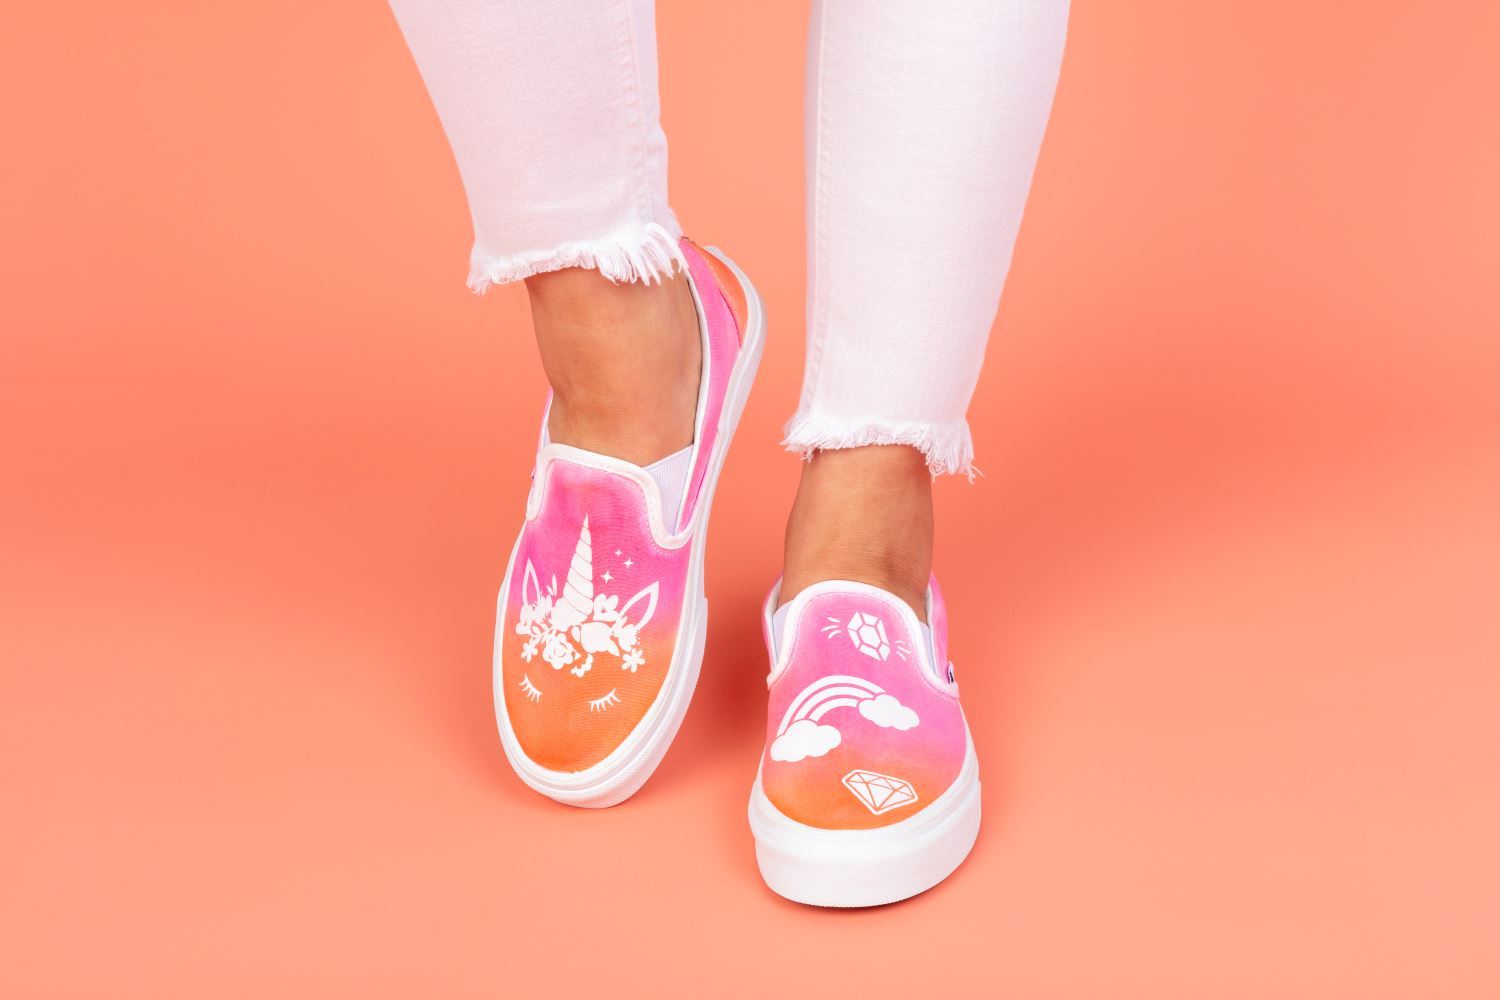 Pink and orange ombré tie-dye shoes with embellishments